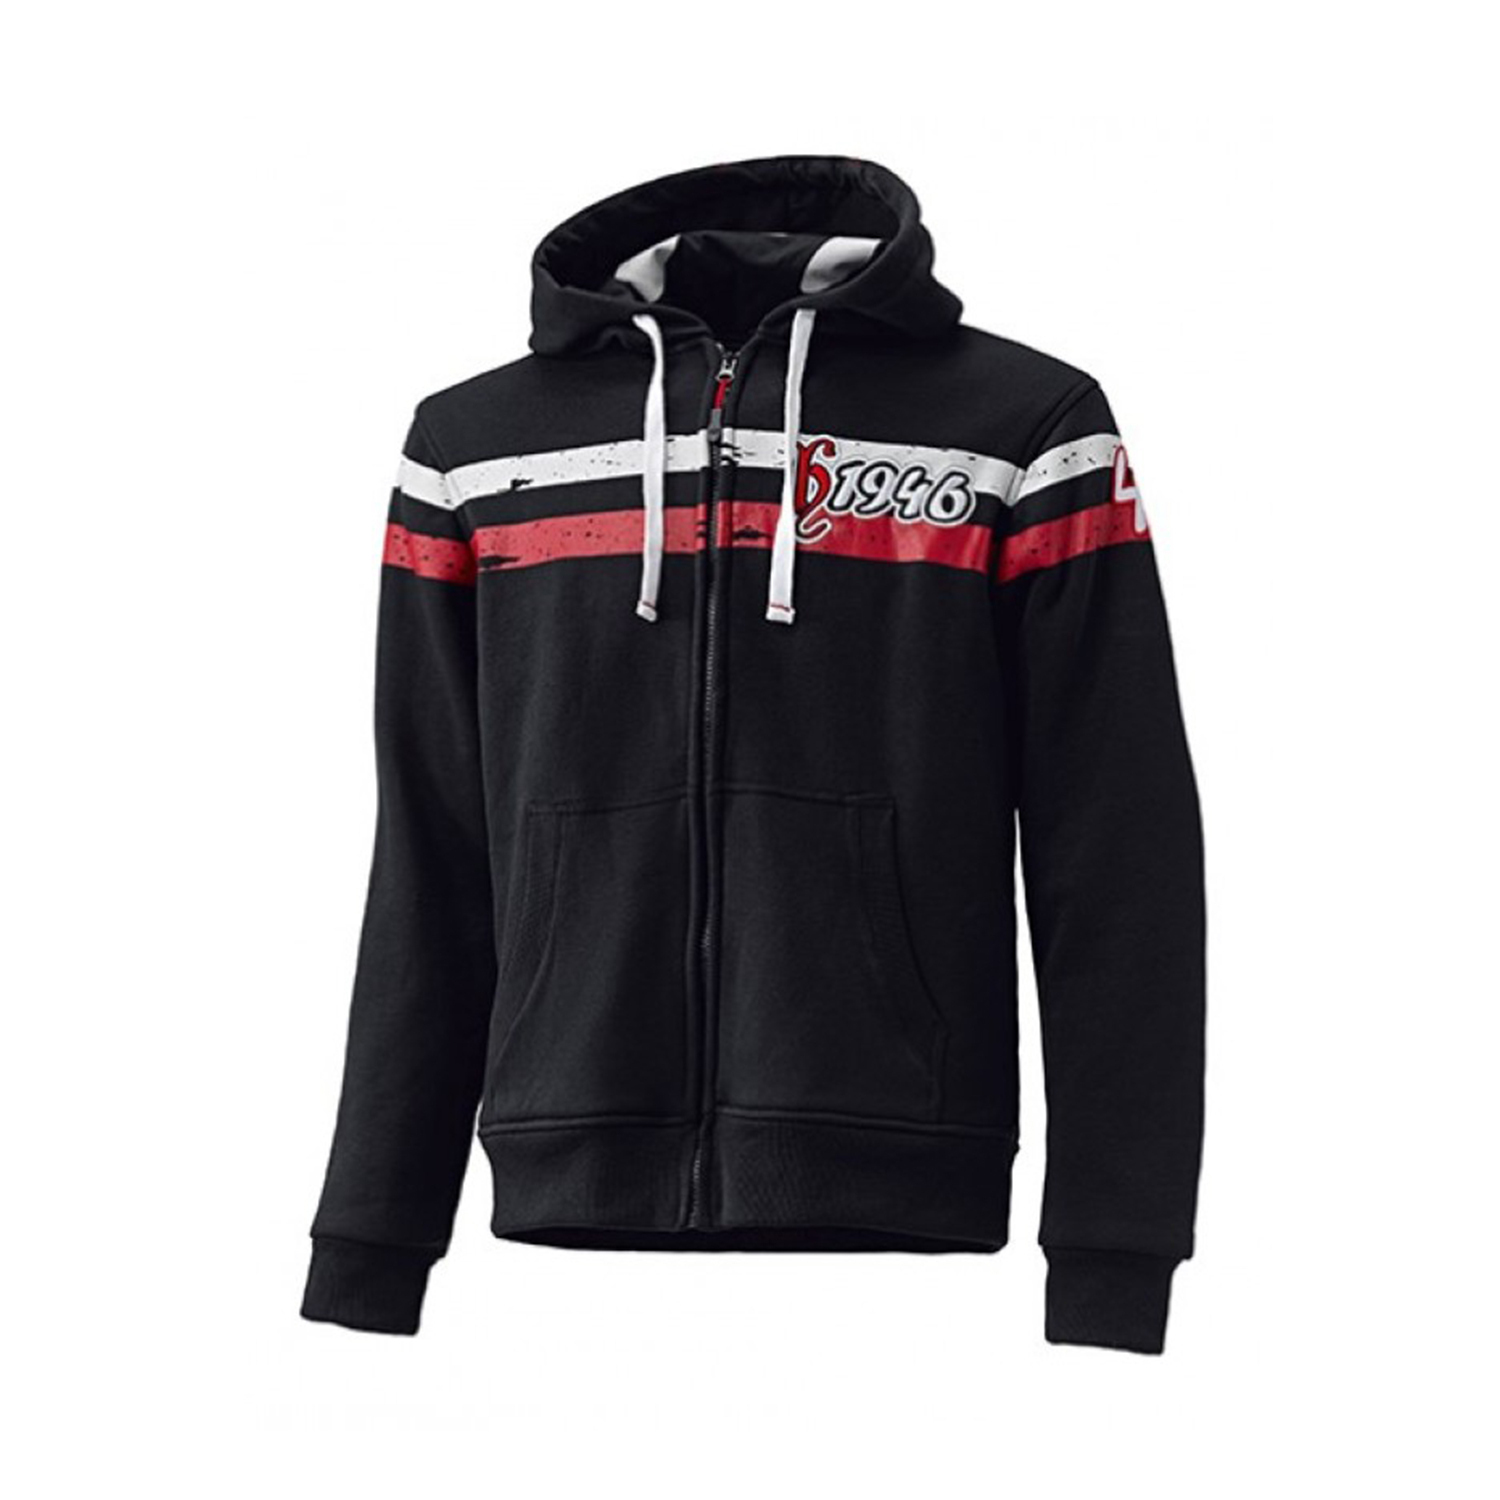 Held Tirano Kevlar Hoodie Black-Red - Available in Various Sizes